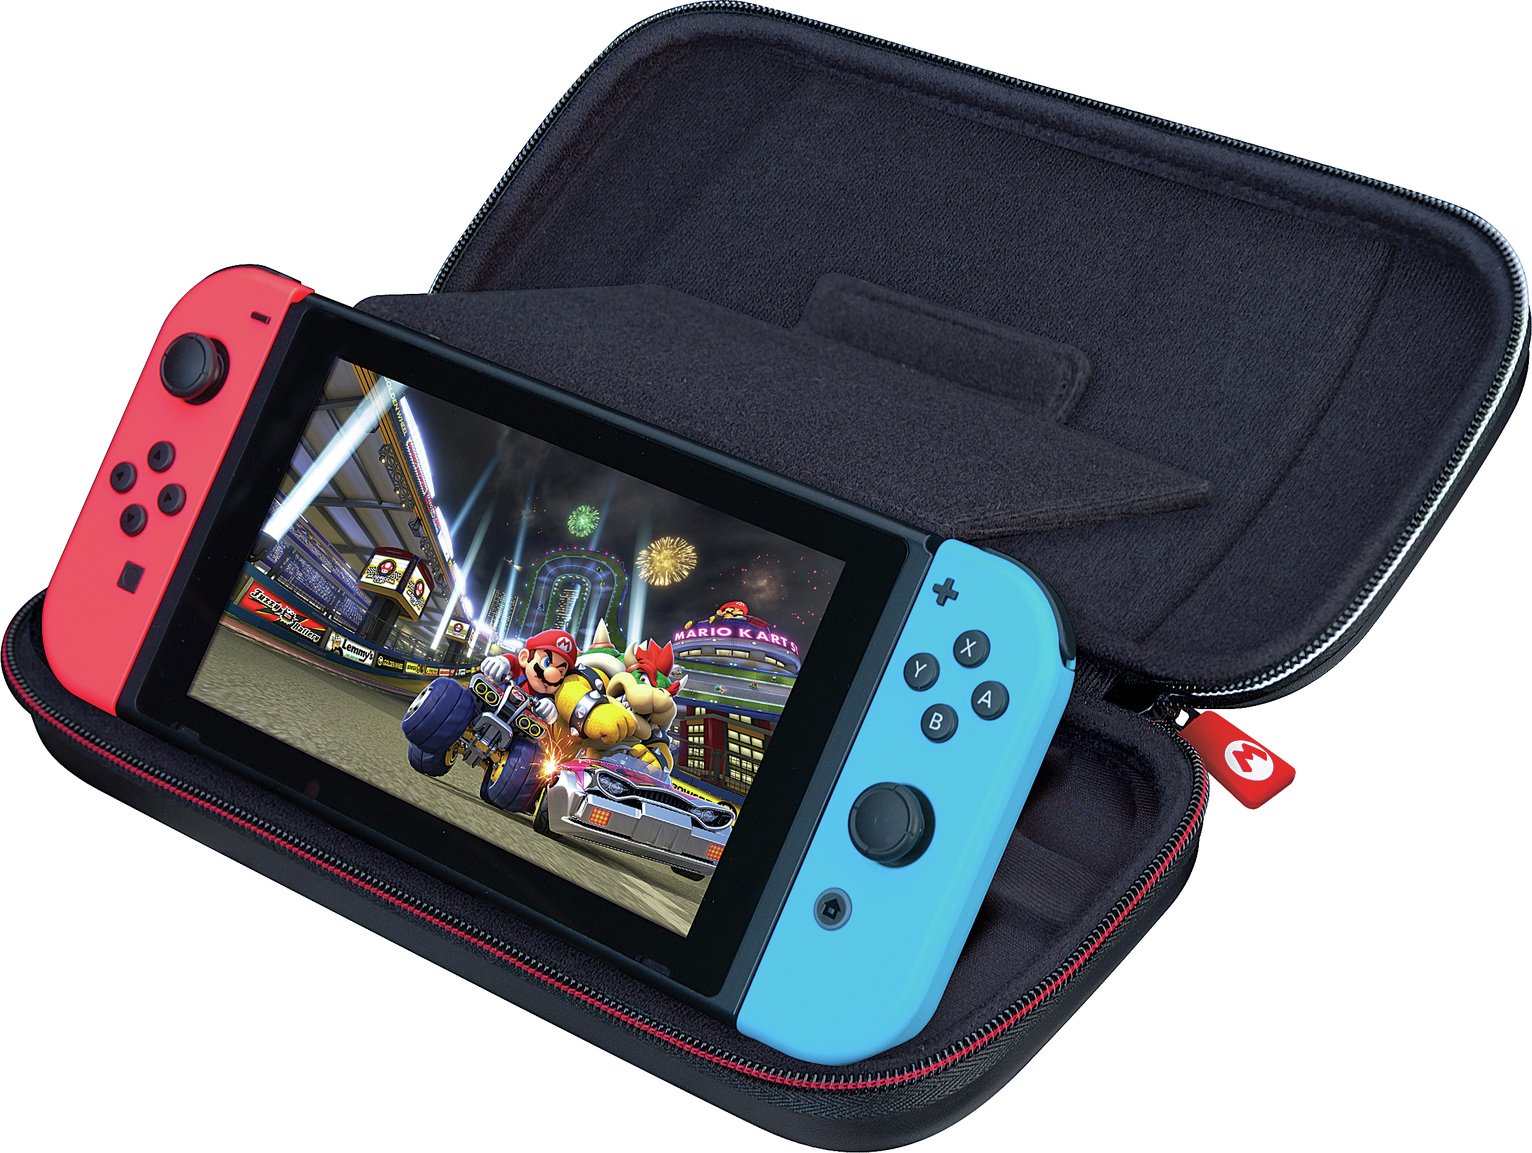 Nintendo Switch Deluxe Travel Case Review